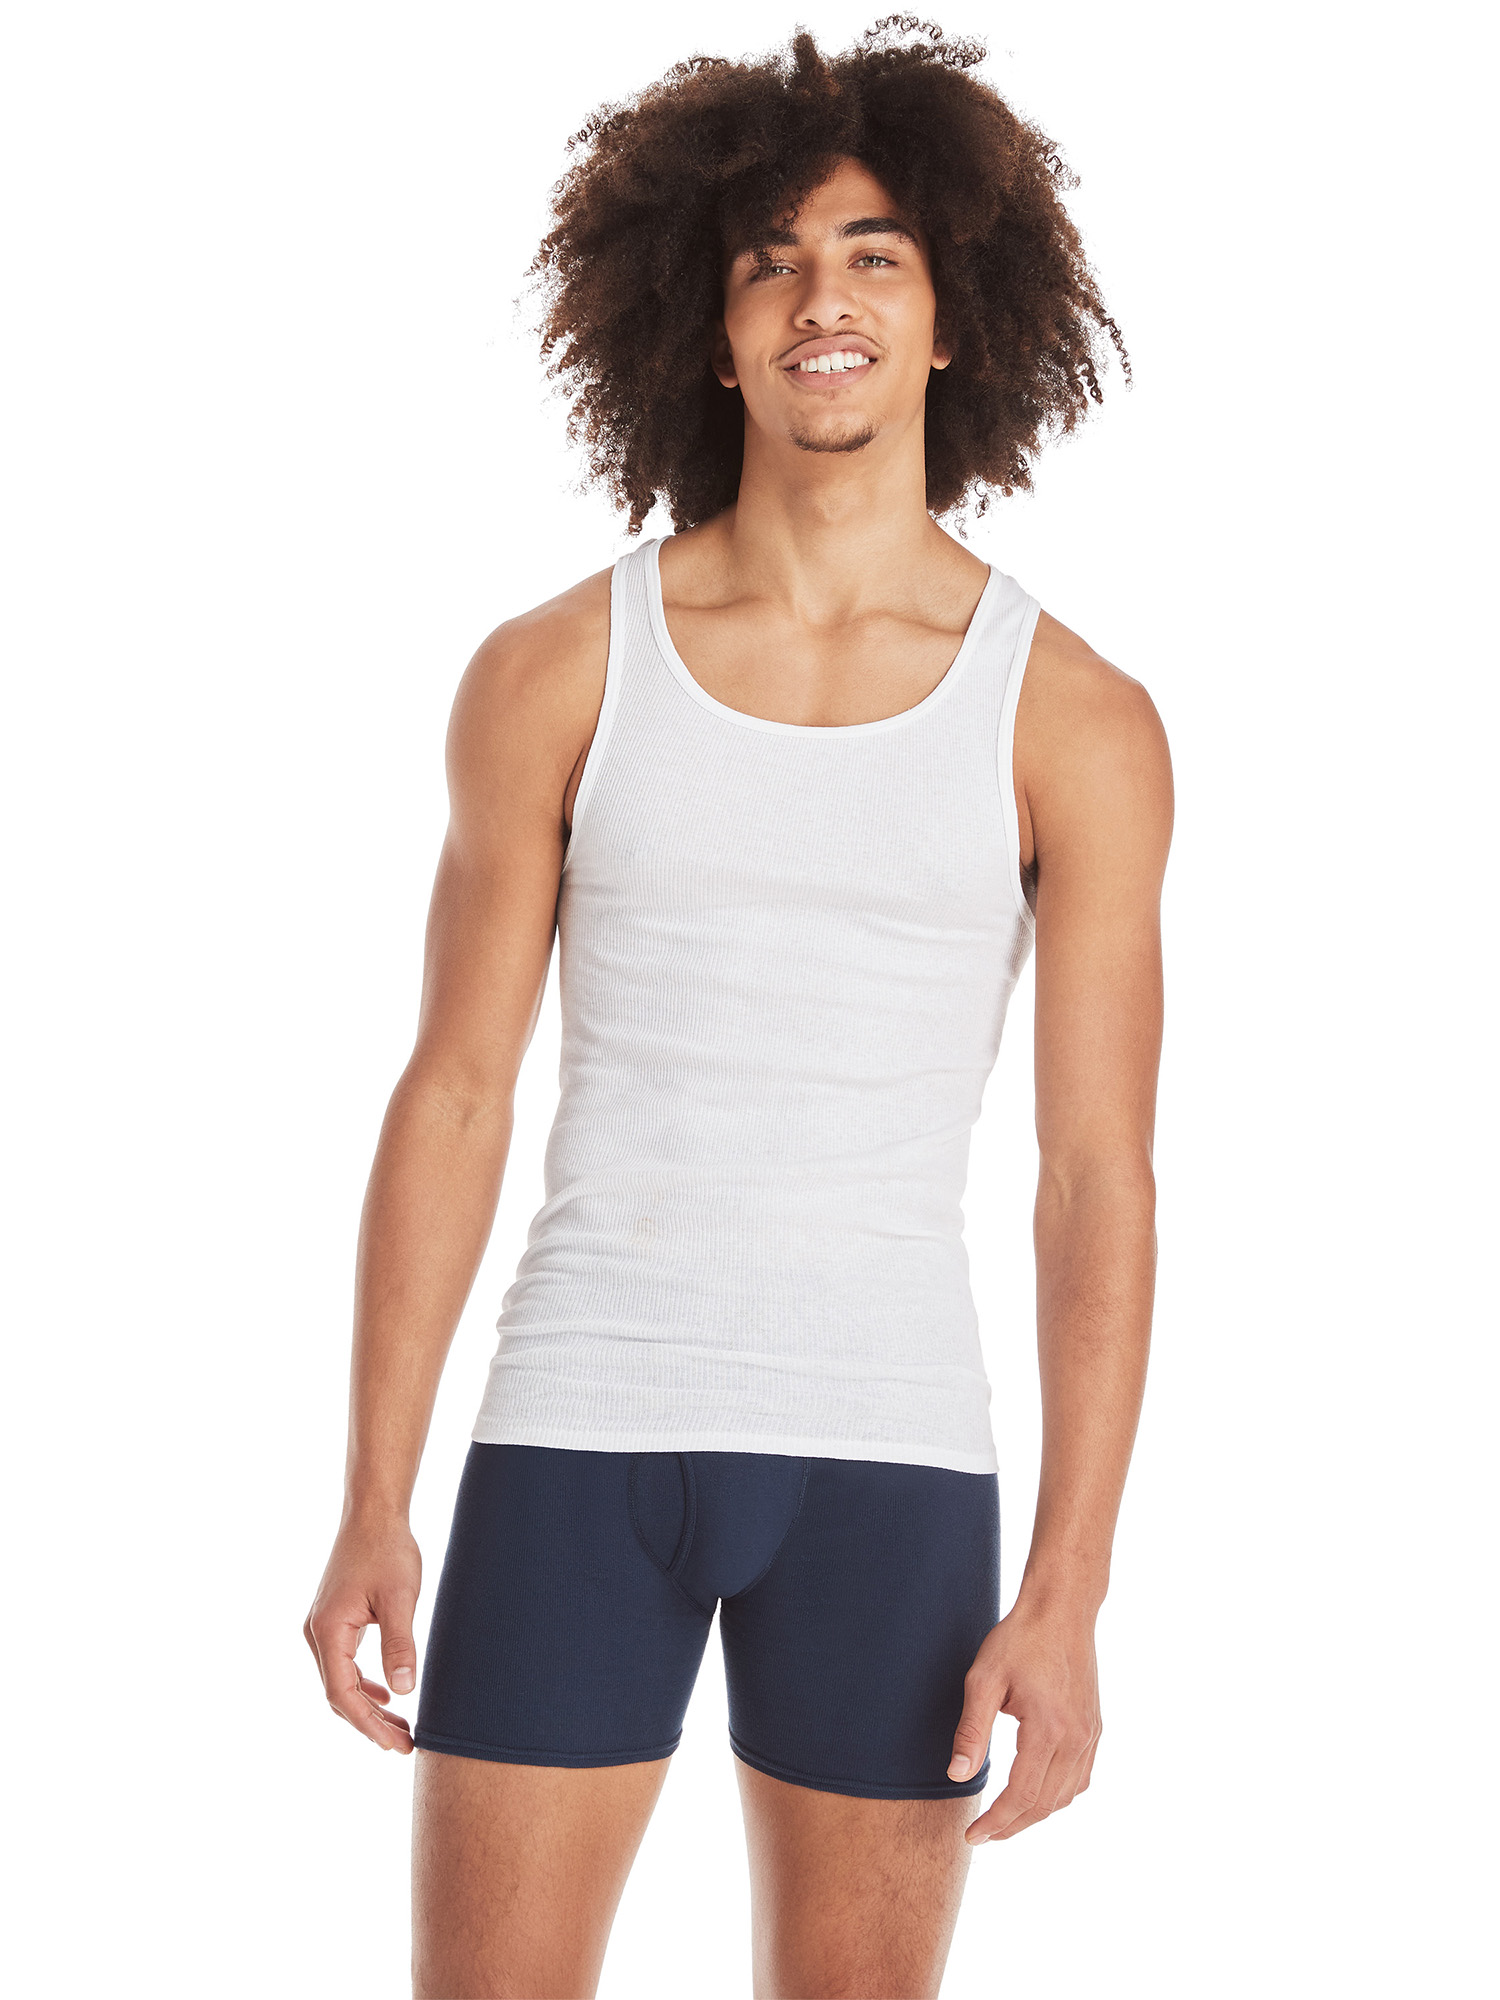 Hanes Men's Tank Top Undershirt Pack in White, Ribbed Moisture-Wicking Cotton, 6-Pack - image 4 of 10